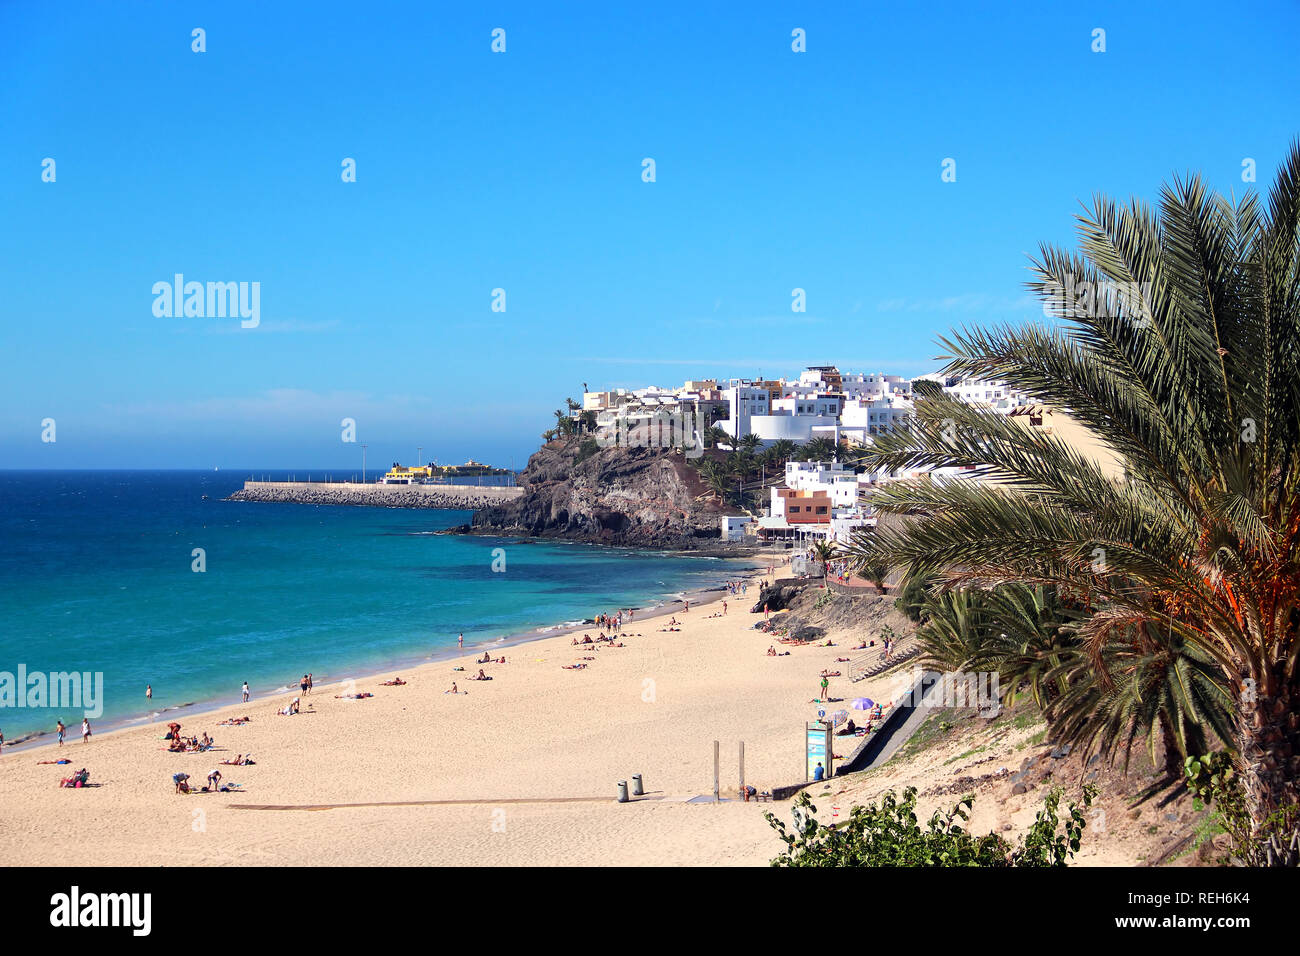 Beach and town of Morro Jable, Fuerteventura, Canary islands, Spain Stock Photo